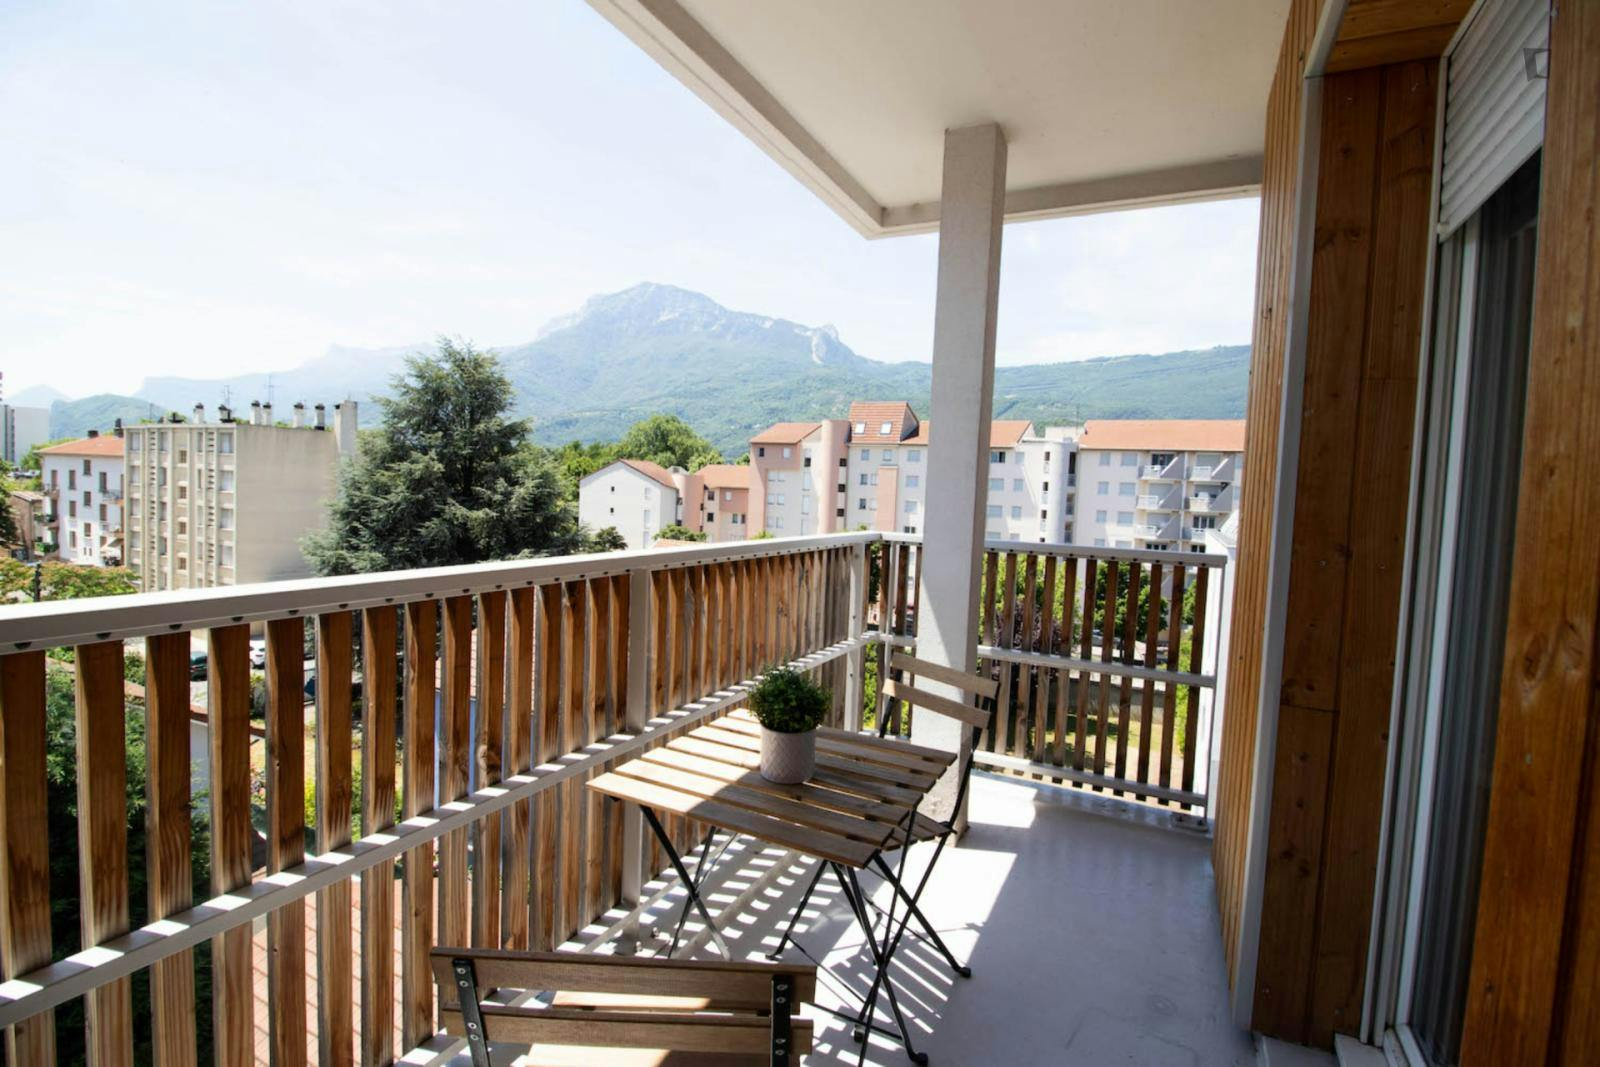 Spacious 15m² bedroom to rent in Grenoble -G016